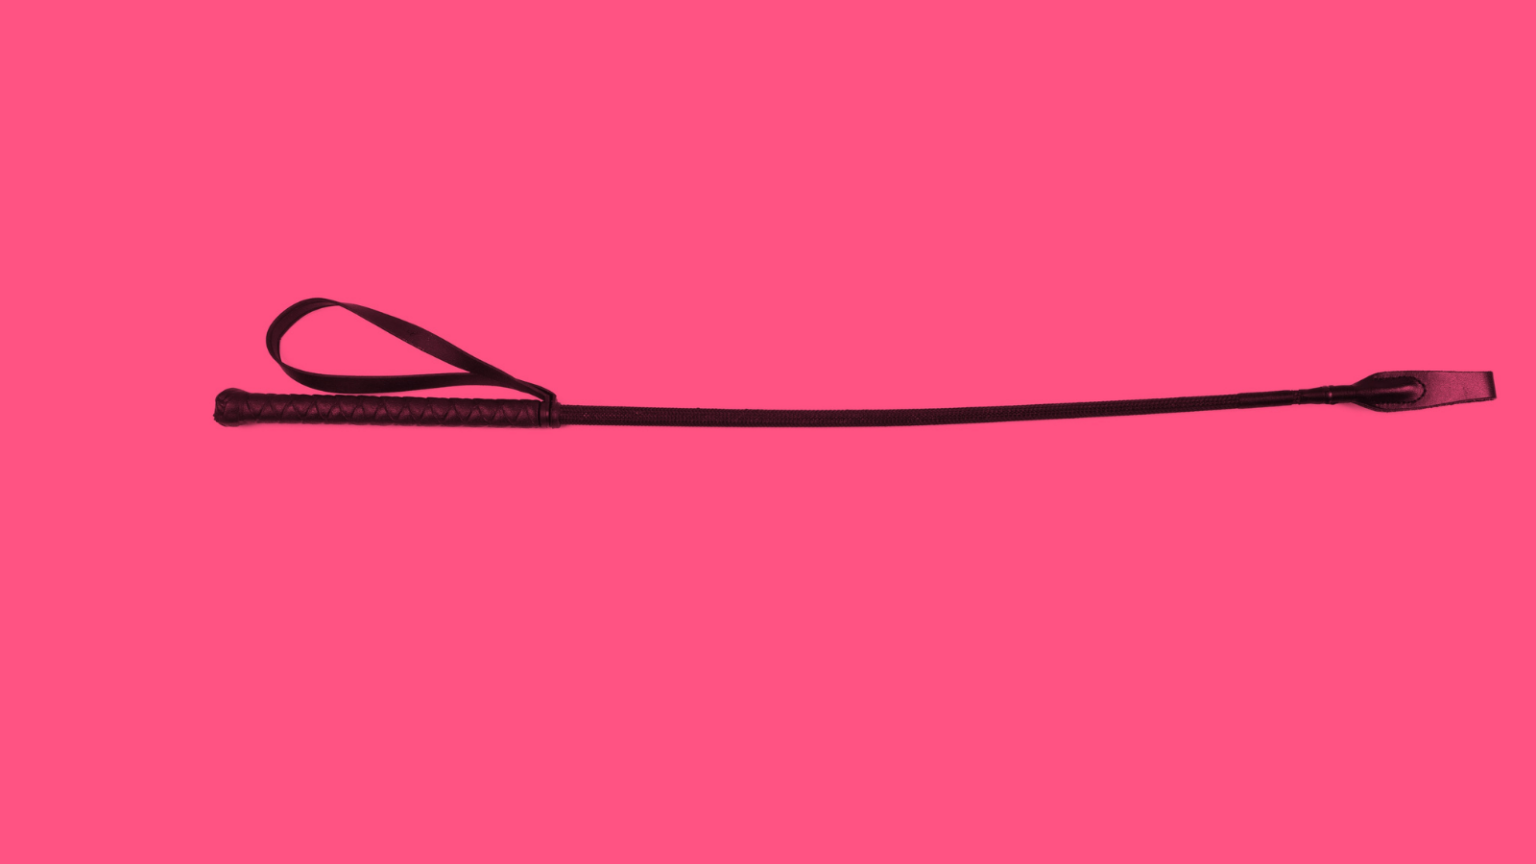 Black leather riding crop on hot pink background